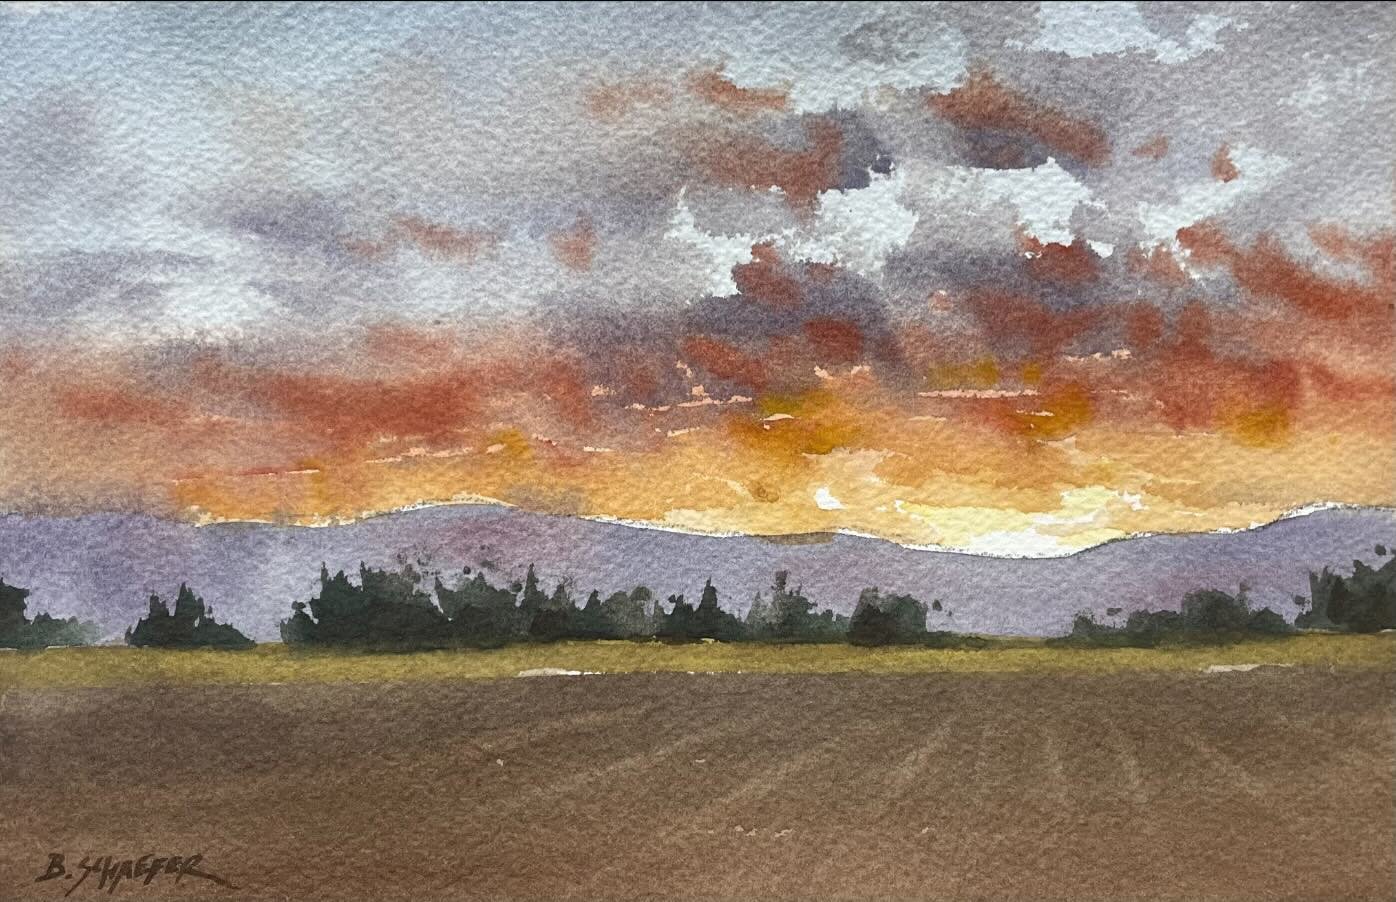 I painted this sunset scene a couple years ago as practice and a bit of fun. I remember after I initially painted it, I thought it wasn&rsquo;t that great so I never posted it. 

But recently I was looking through my stack of paintings and came acros